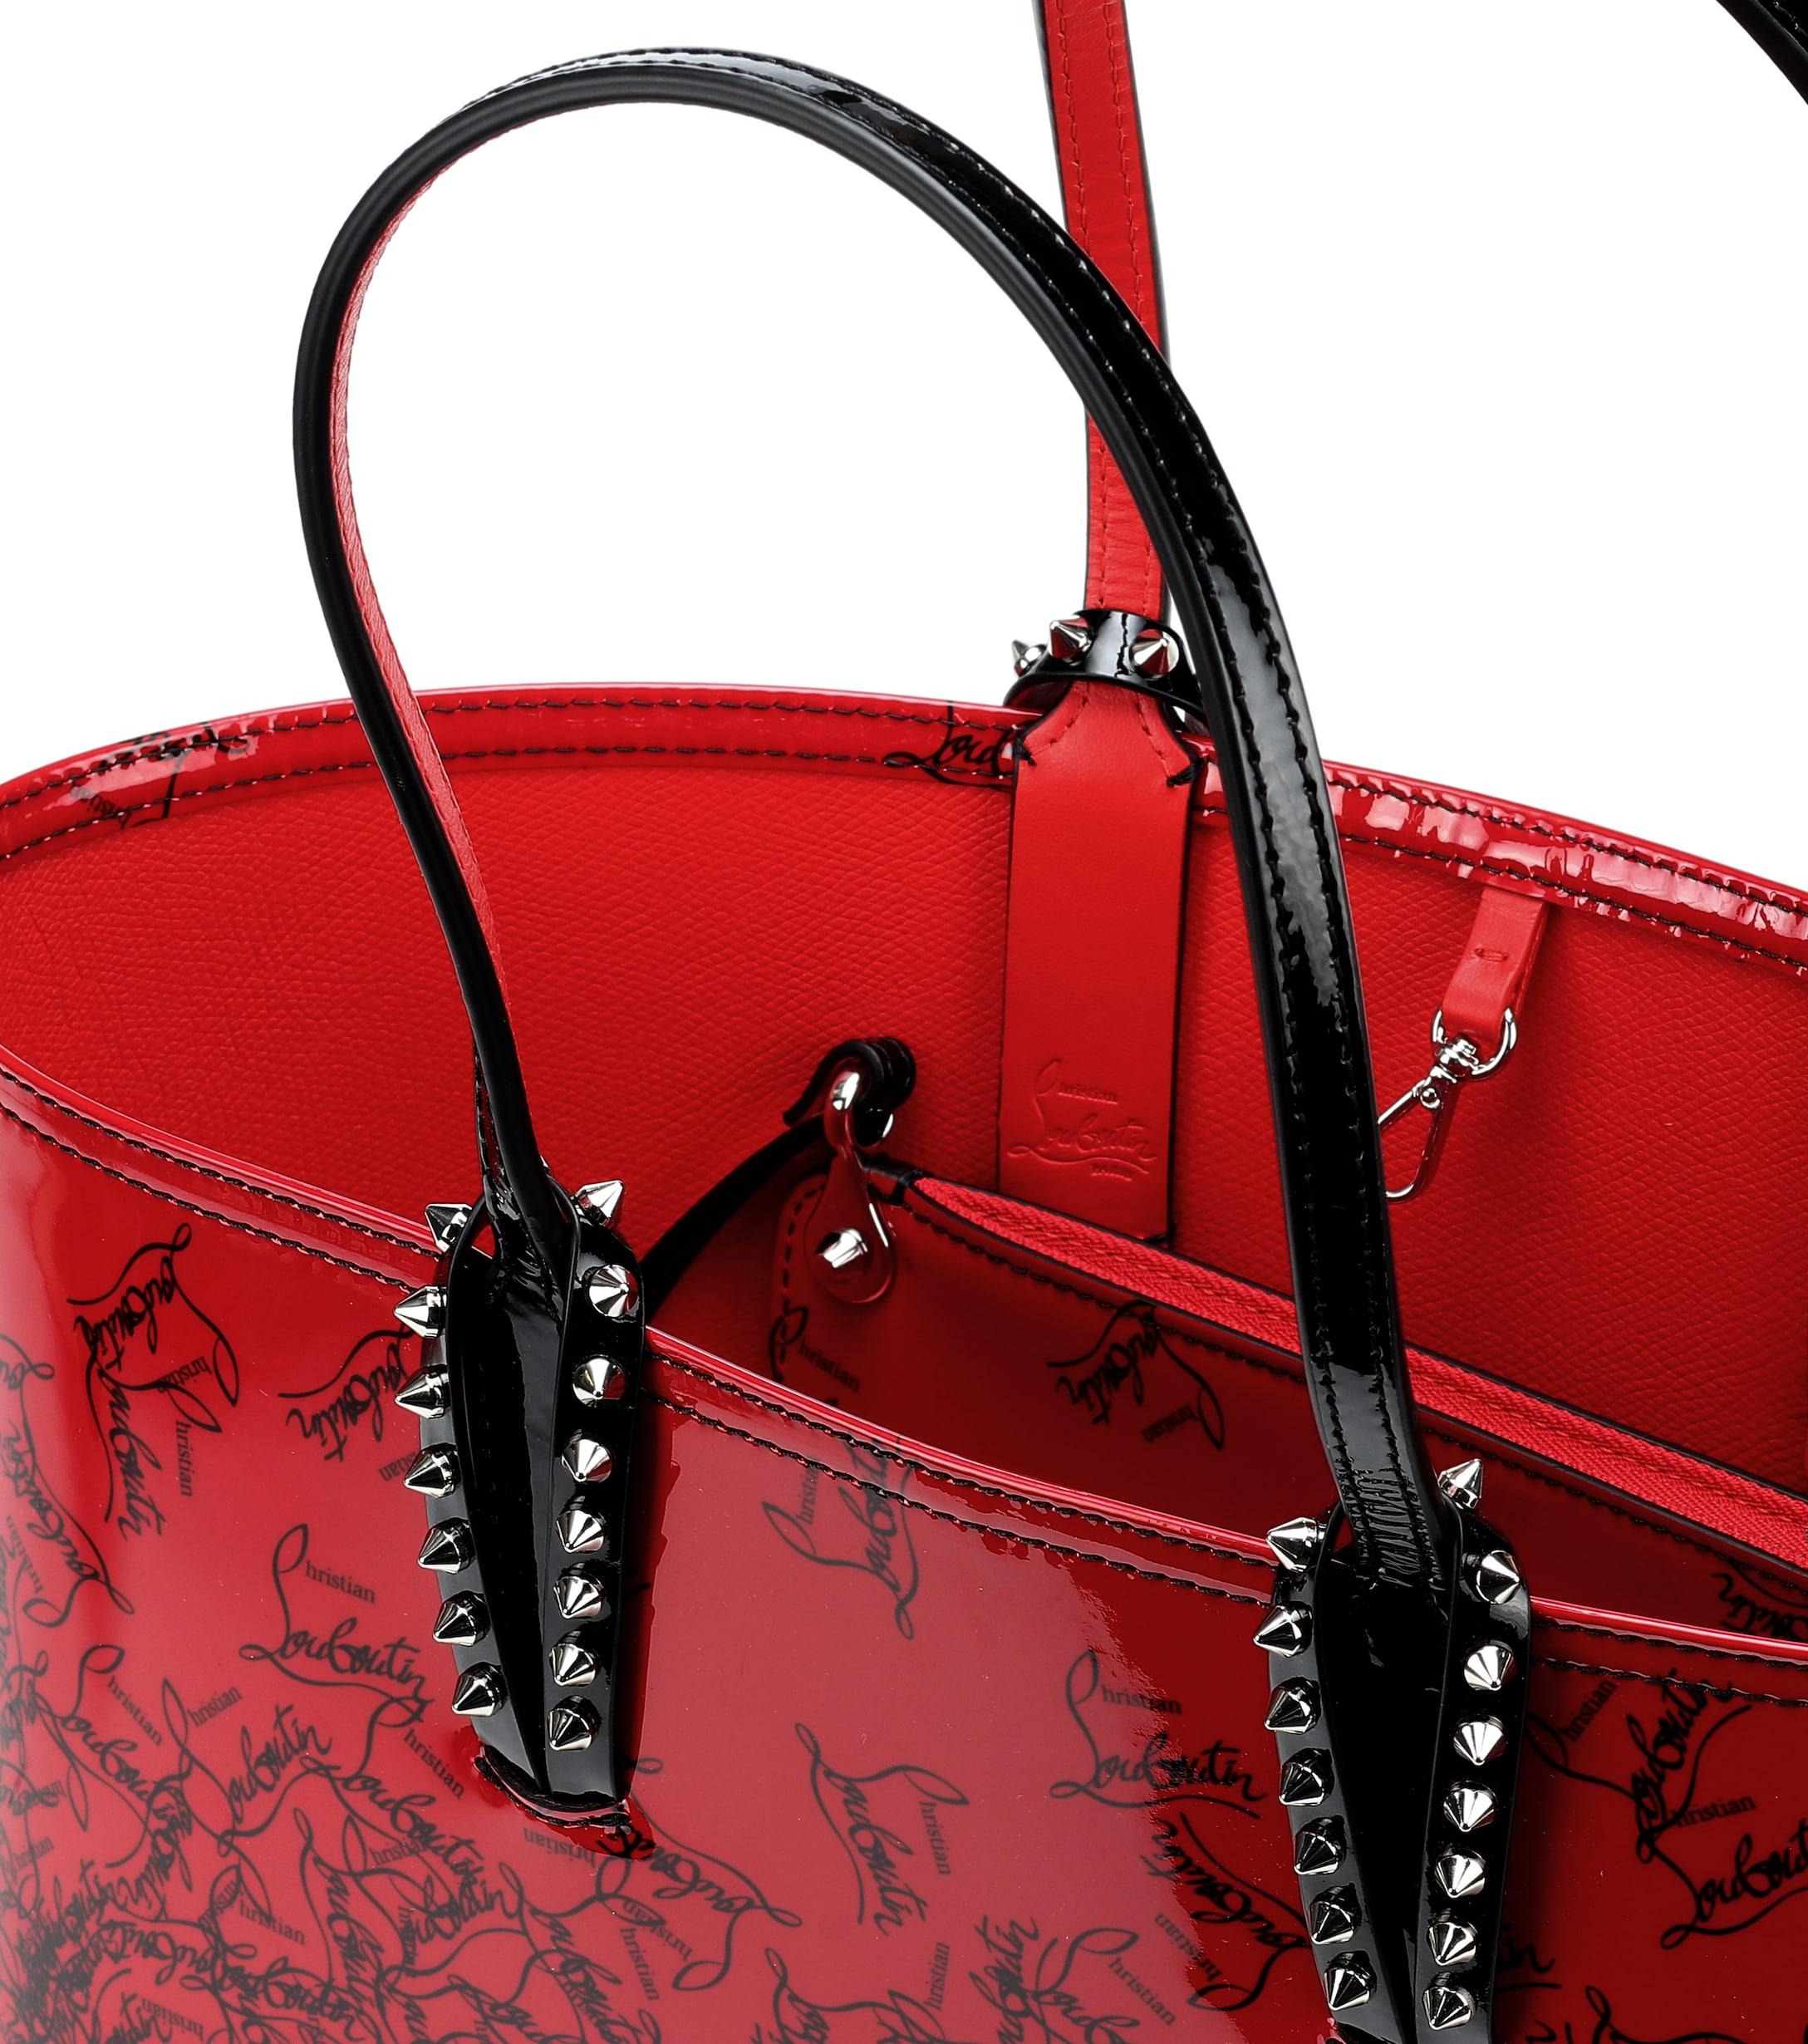 Christian Louboutin Cabata Small Patent Leather Tote in Red